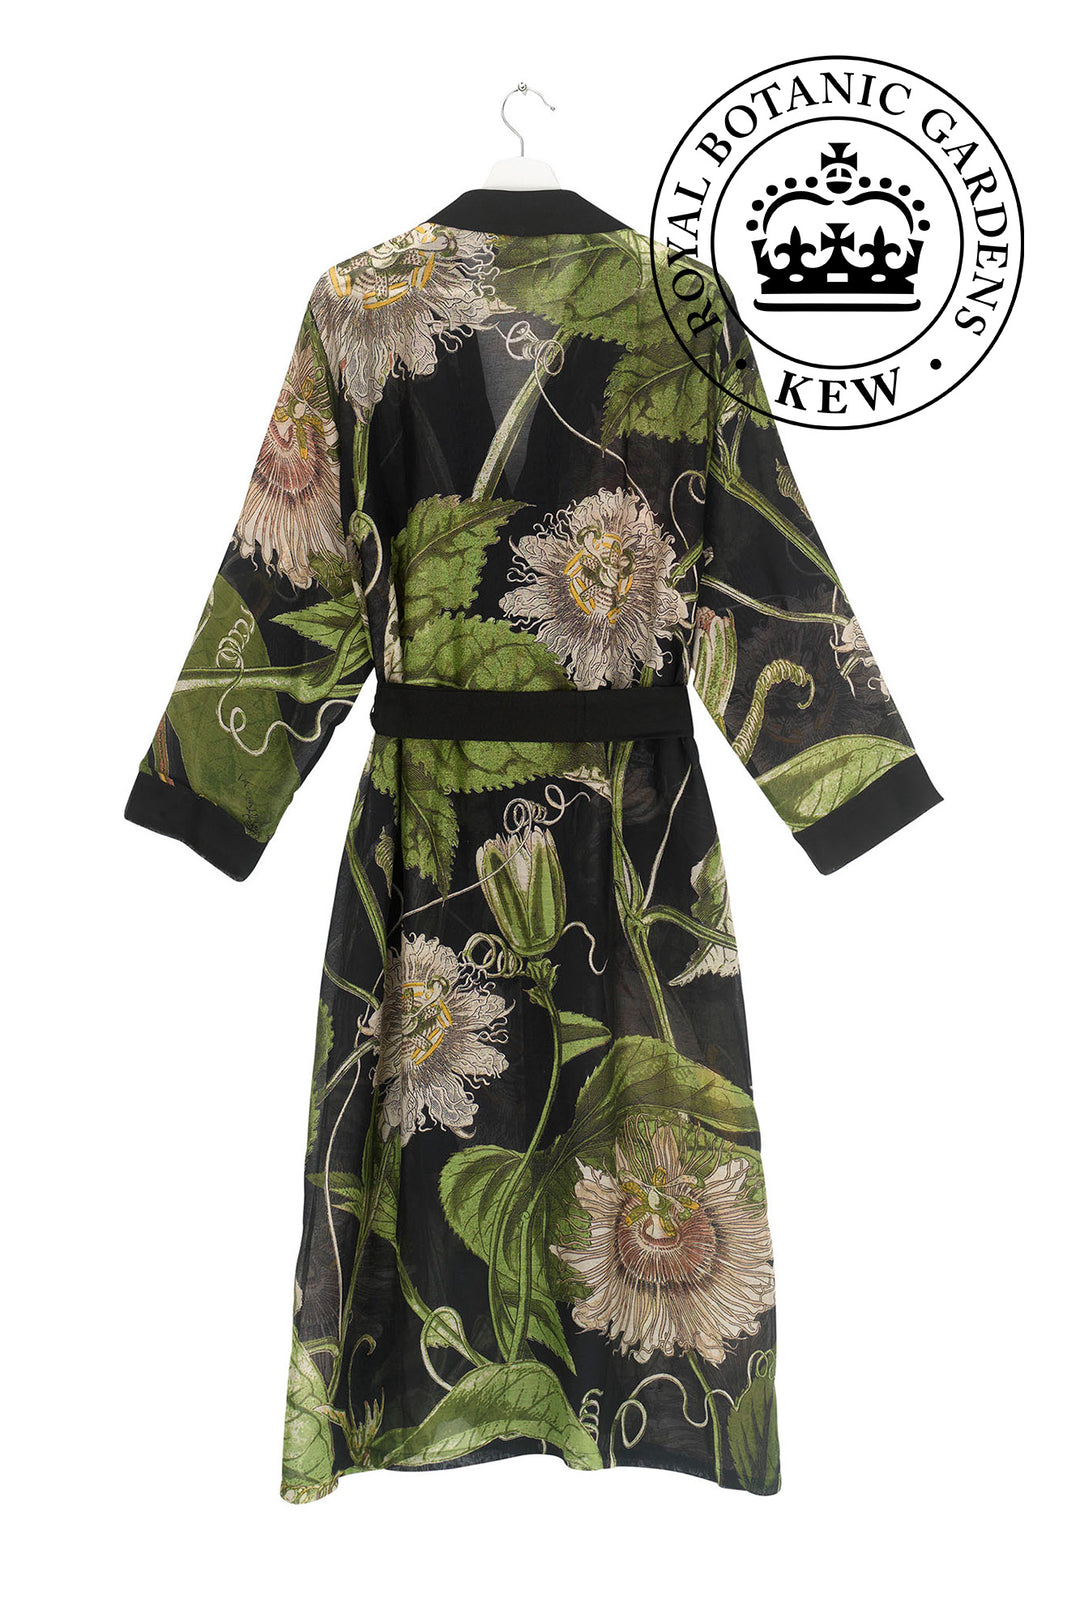 Passion Flower or 'Passiflora' Gown / Robe in black by One Hundred Stars in Collaboration with Kew, Royal Botanic Gardens. 